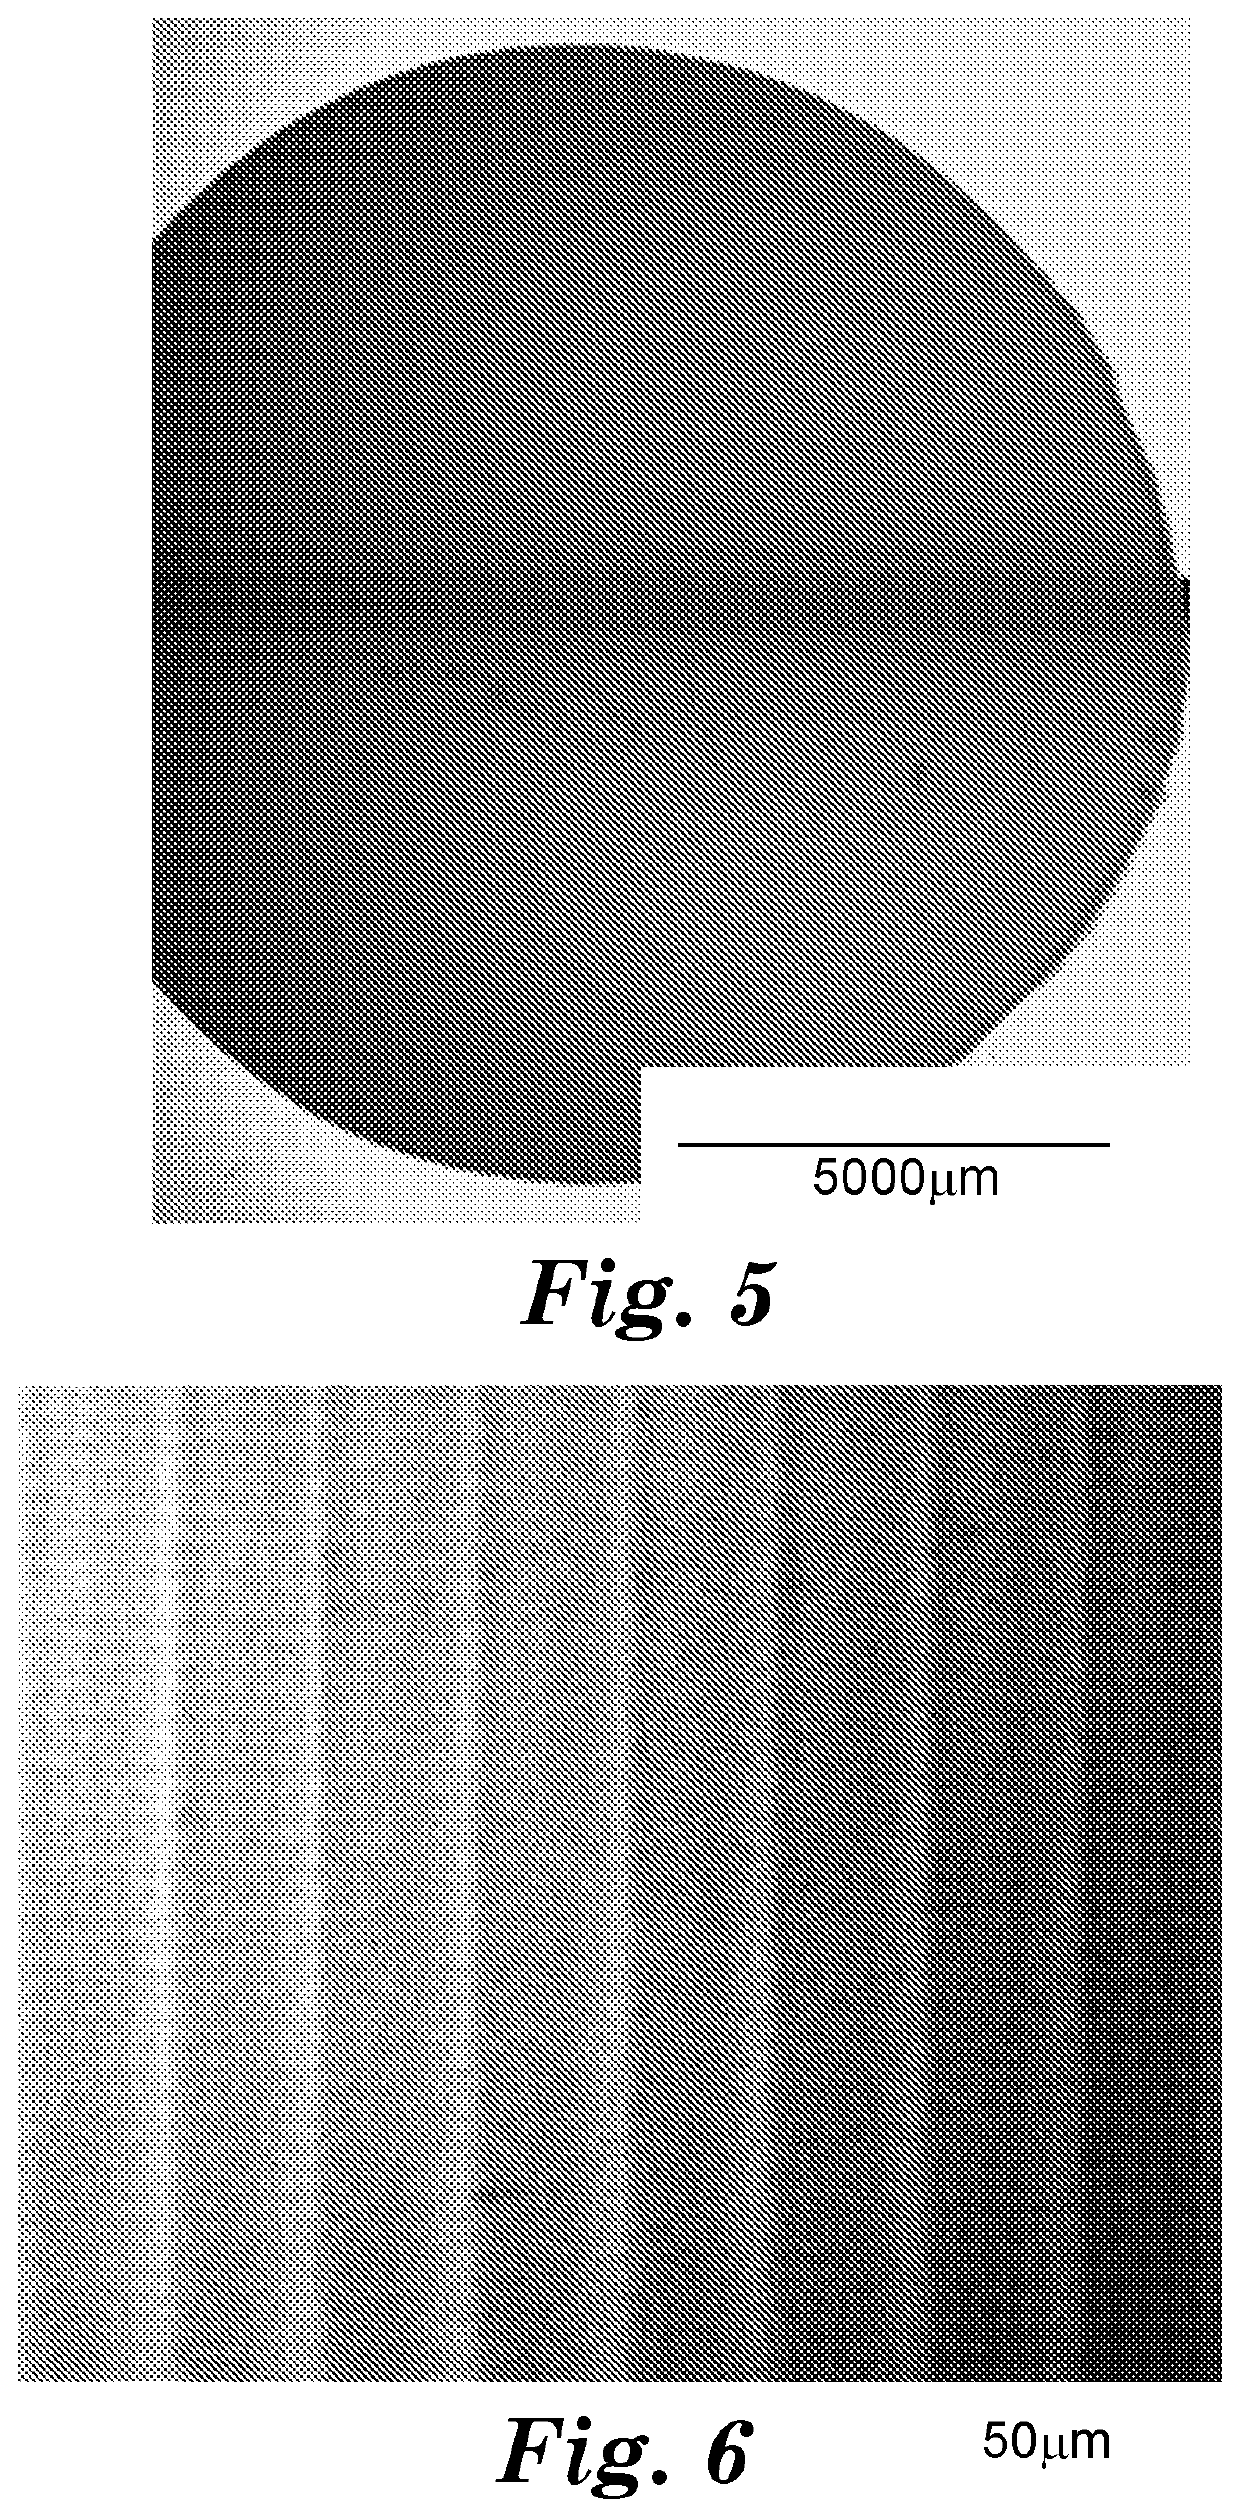 Sol containing nano zirconia particles for use in additive manufacturing processes for the production of 3-dimensional articles